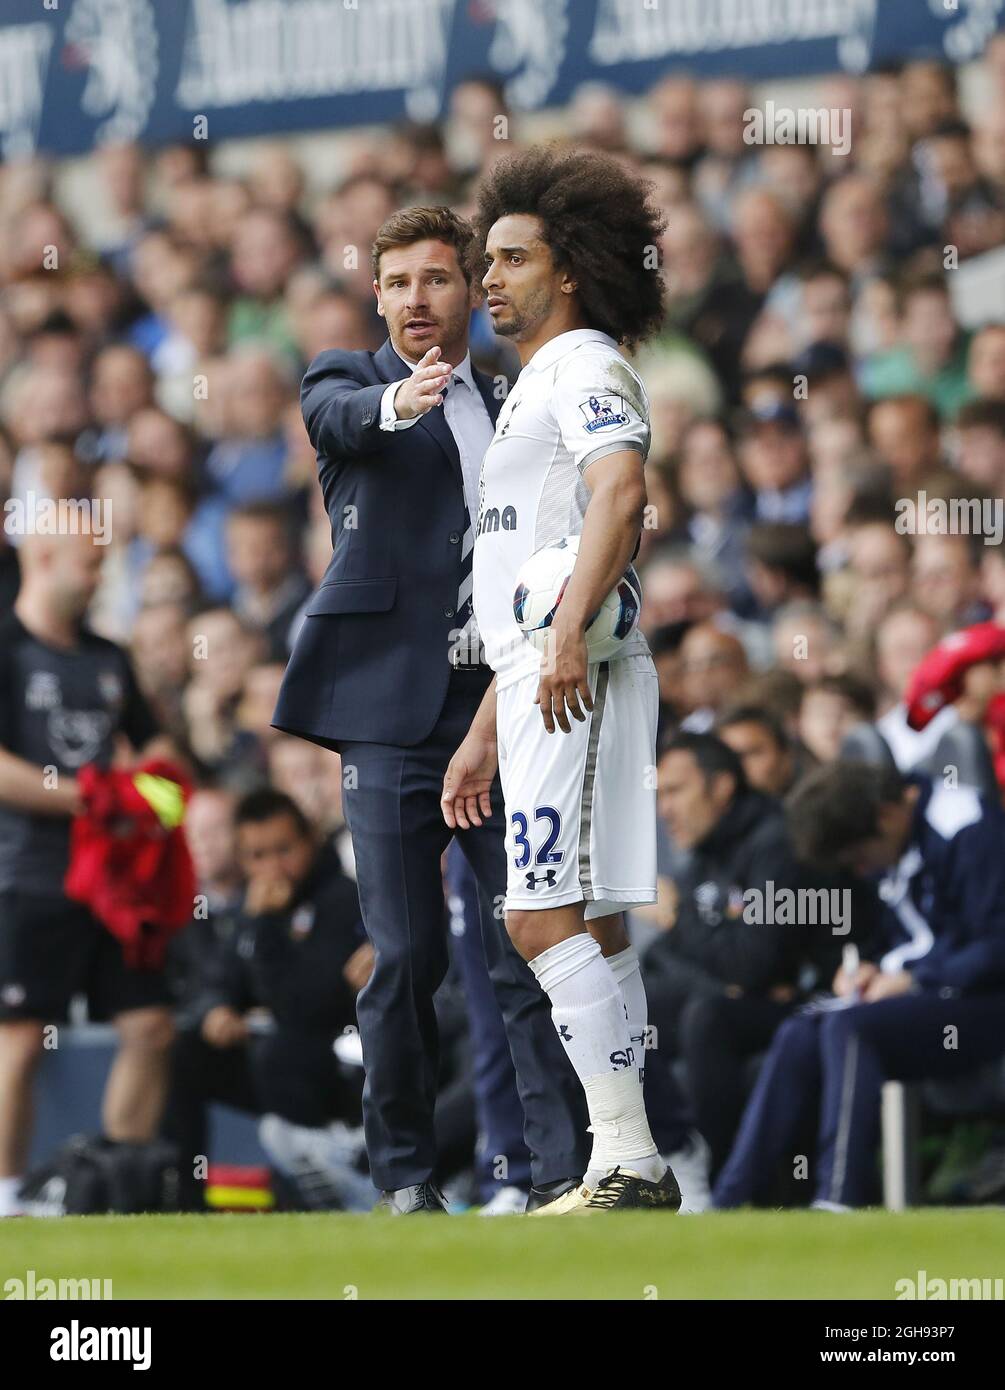 Tottenham's Andre Villas-Boas chats with Benoit Assou-Ekotto during the Barclays Premier League match between Tottenham Hotspur and Southampton in White Hart Lane, London on April 21, 2013. Picture David Klein Stock Photo